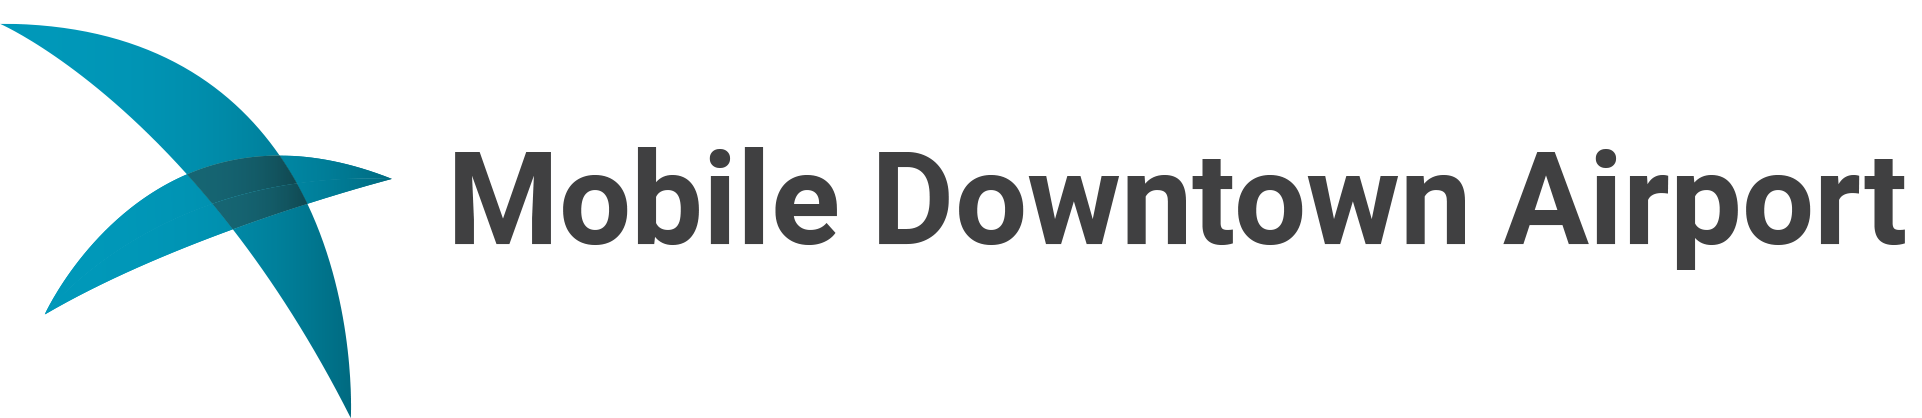 Mobile Downtown Airport Logo